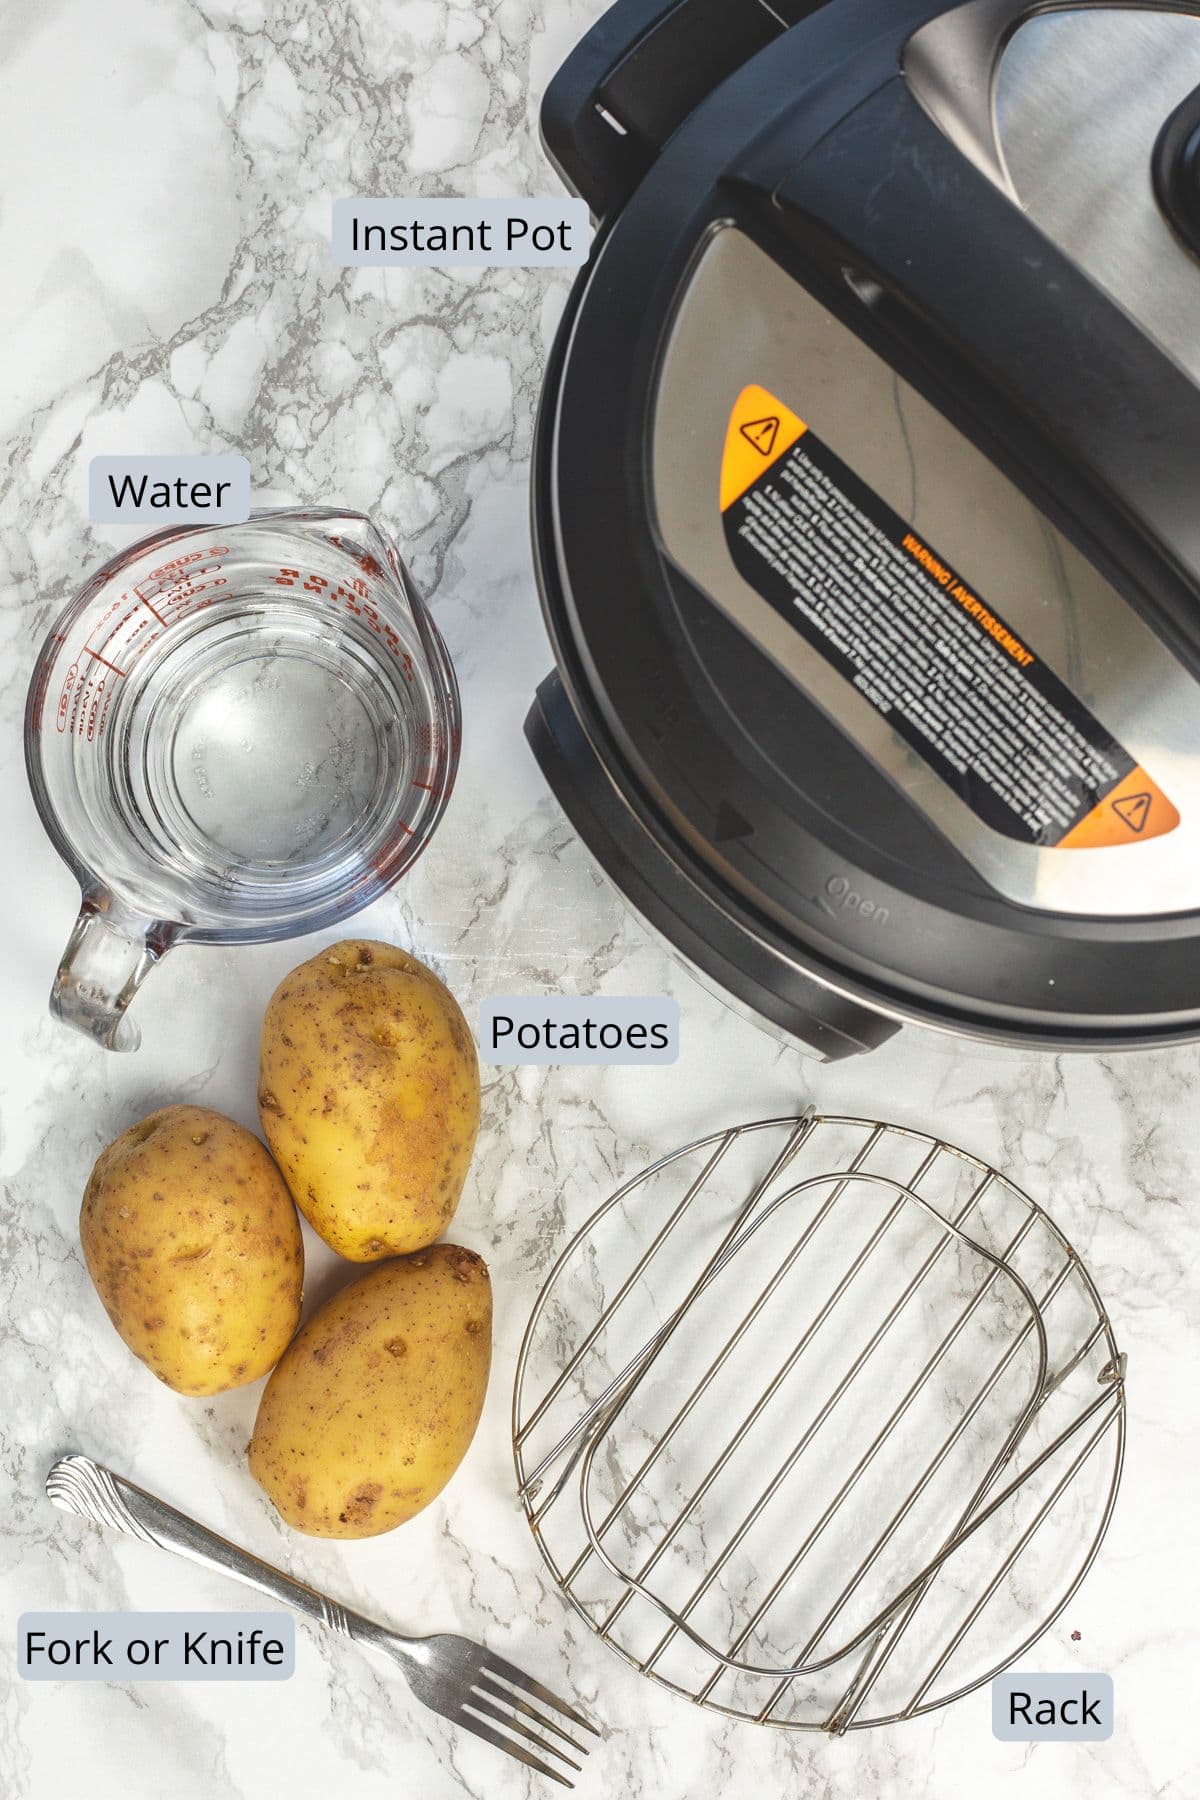 Ingredients and equipments required to boil potatoes in instant pot with labels.